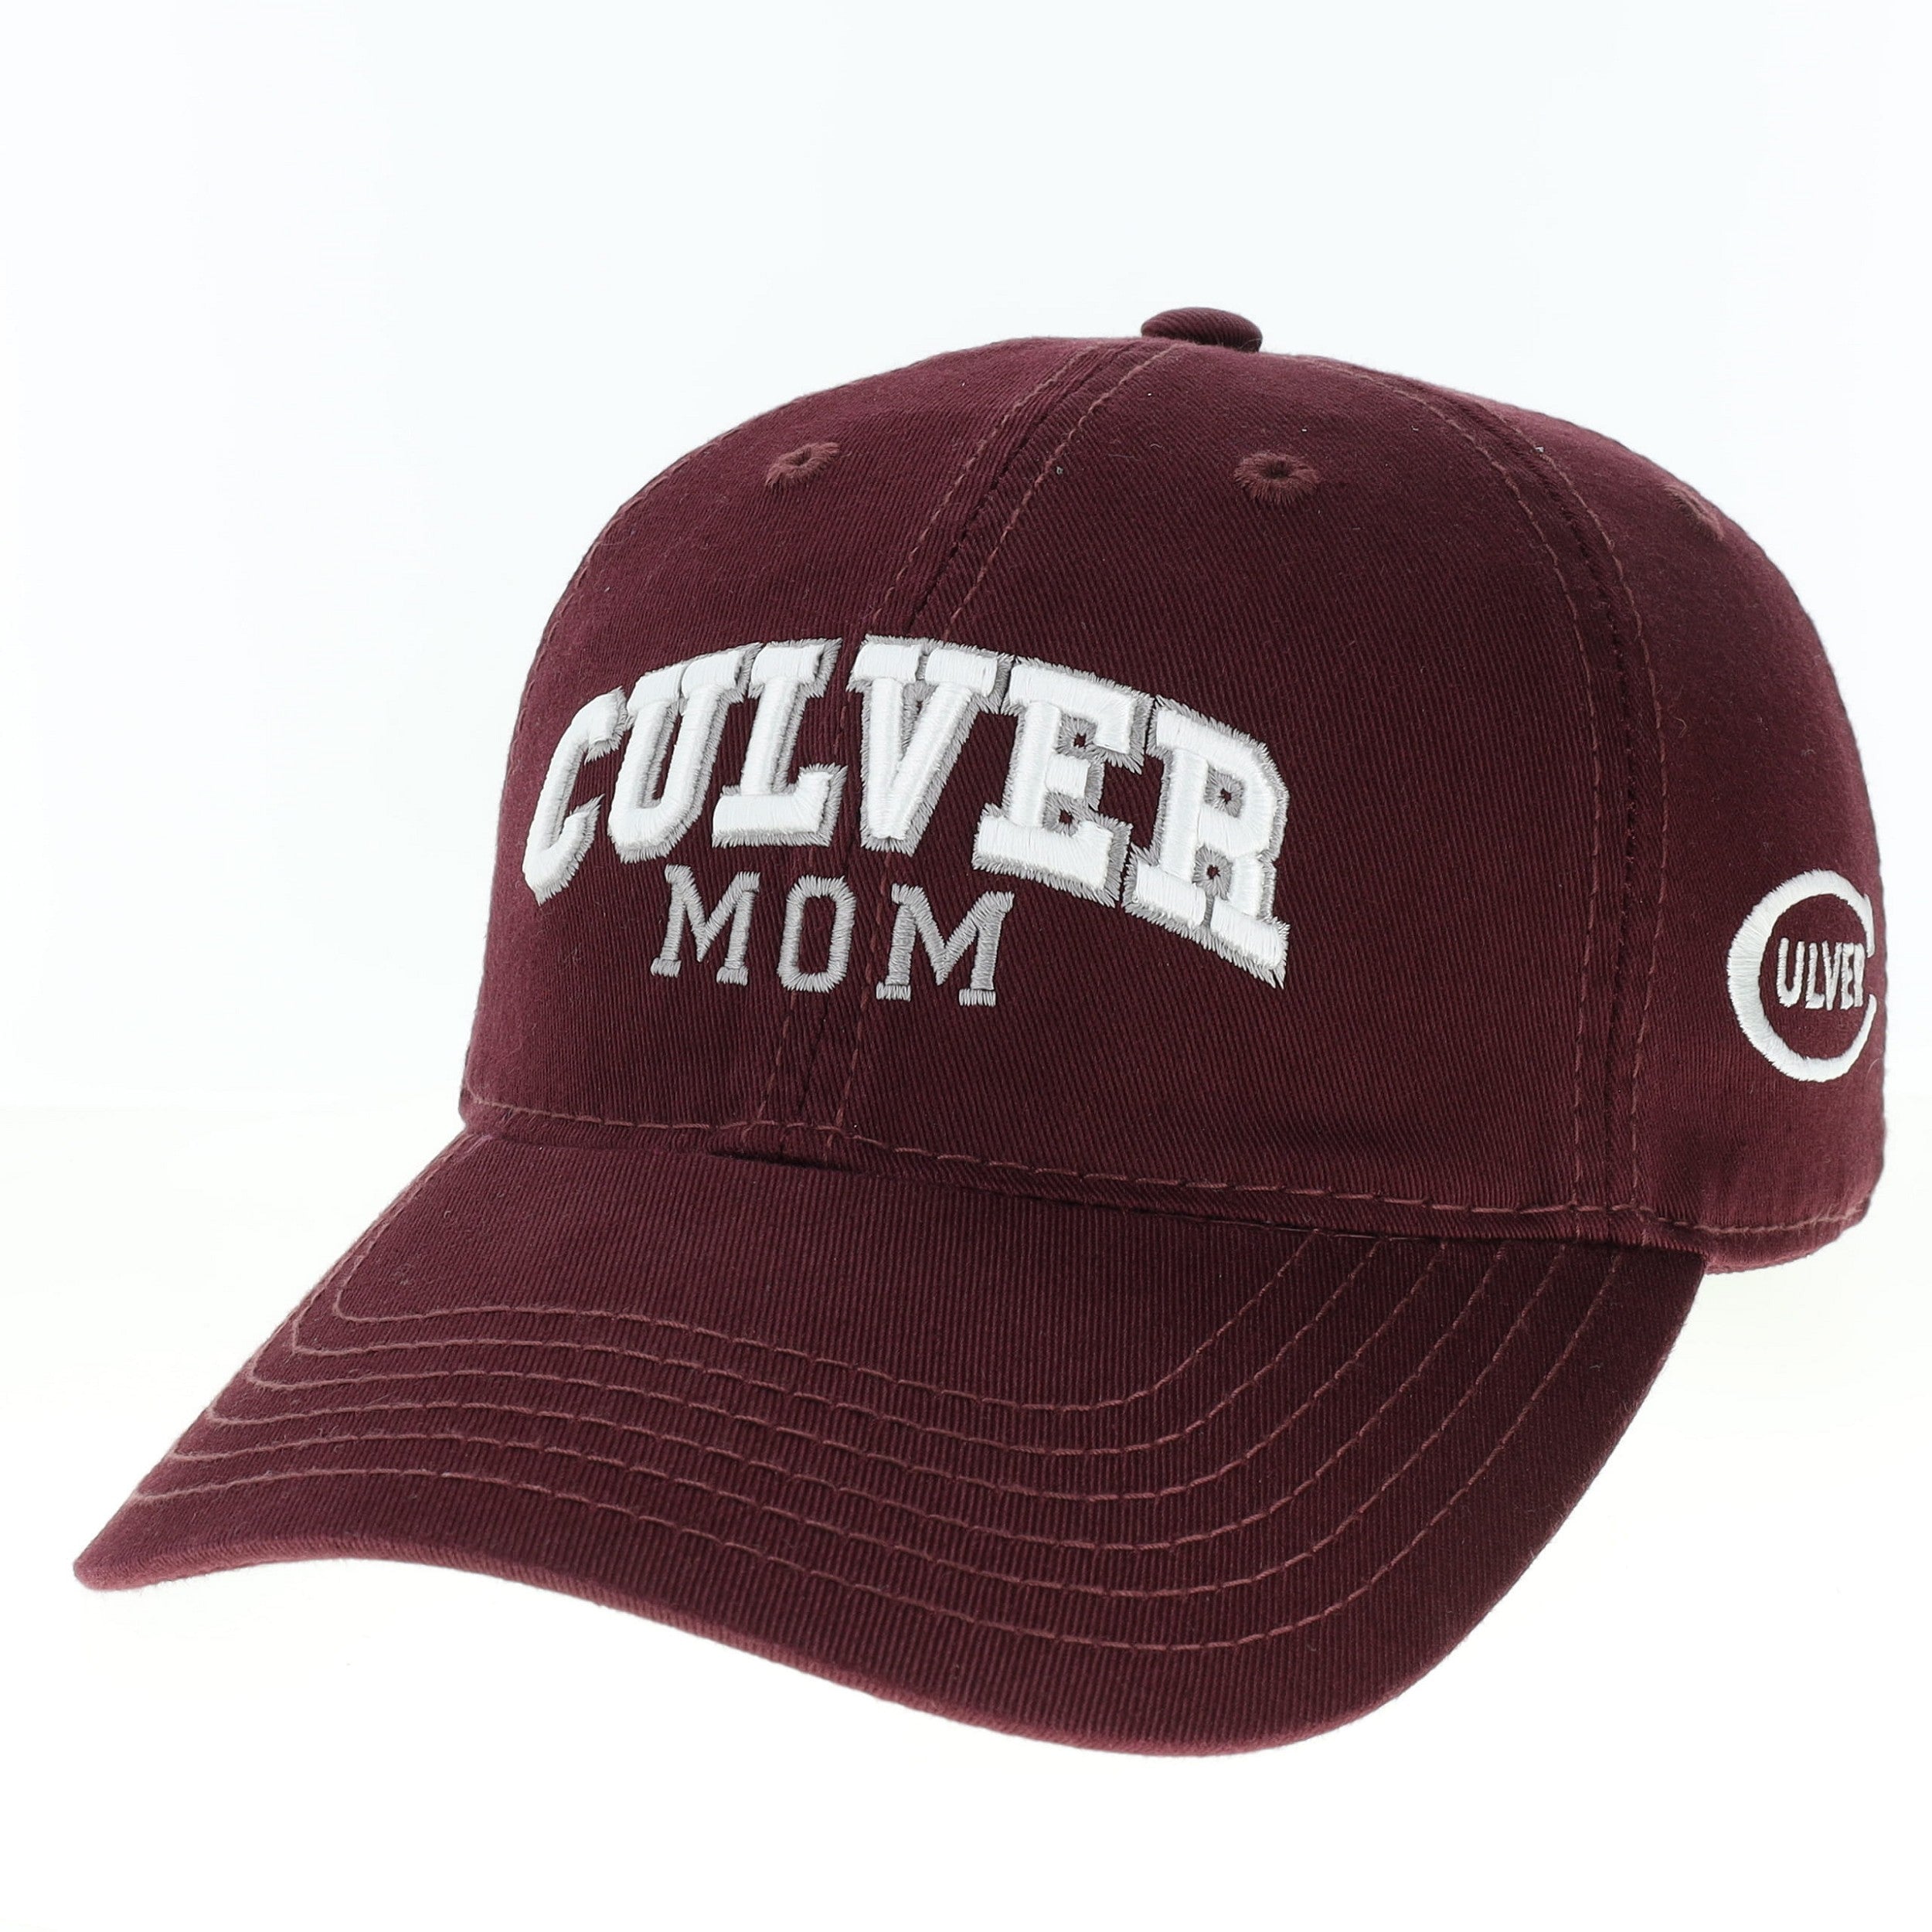 Mom Relaxed Twill Adjustable Hat - Maroon